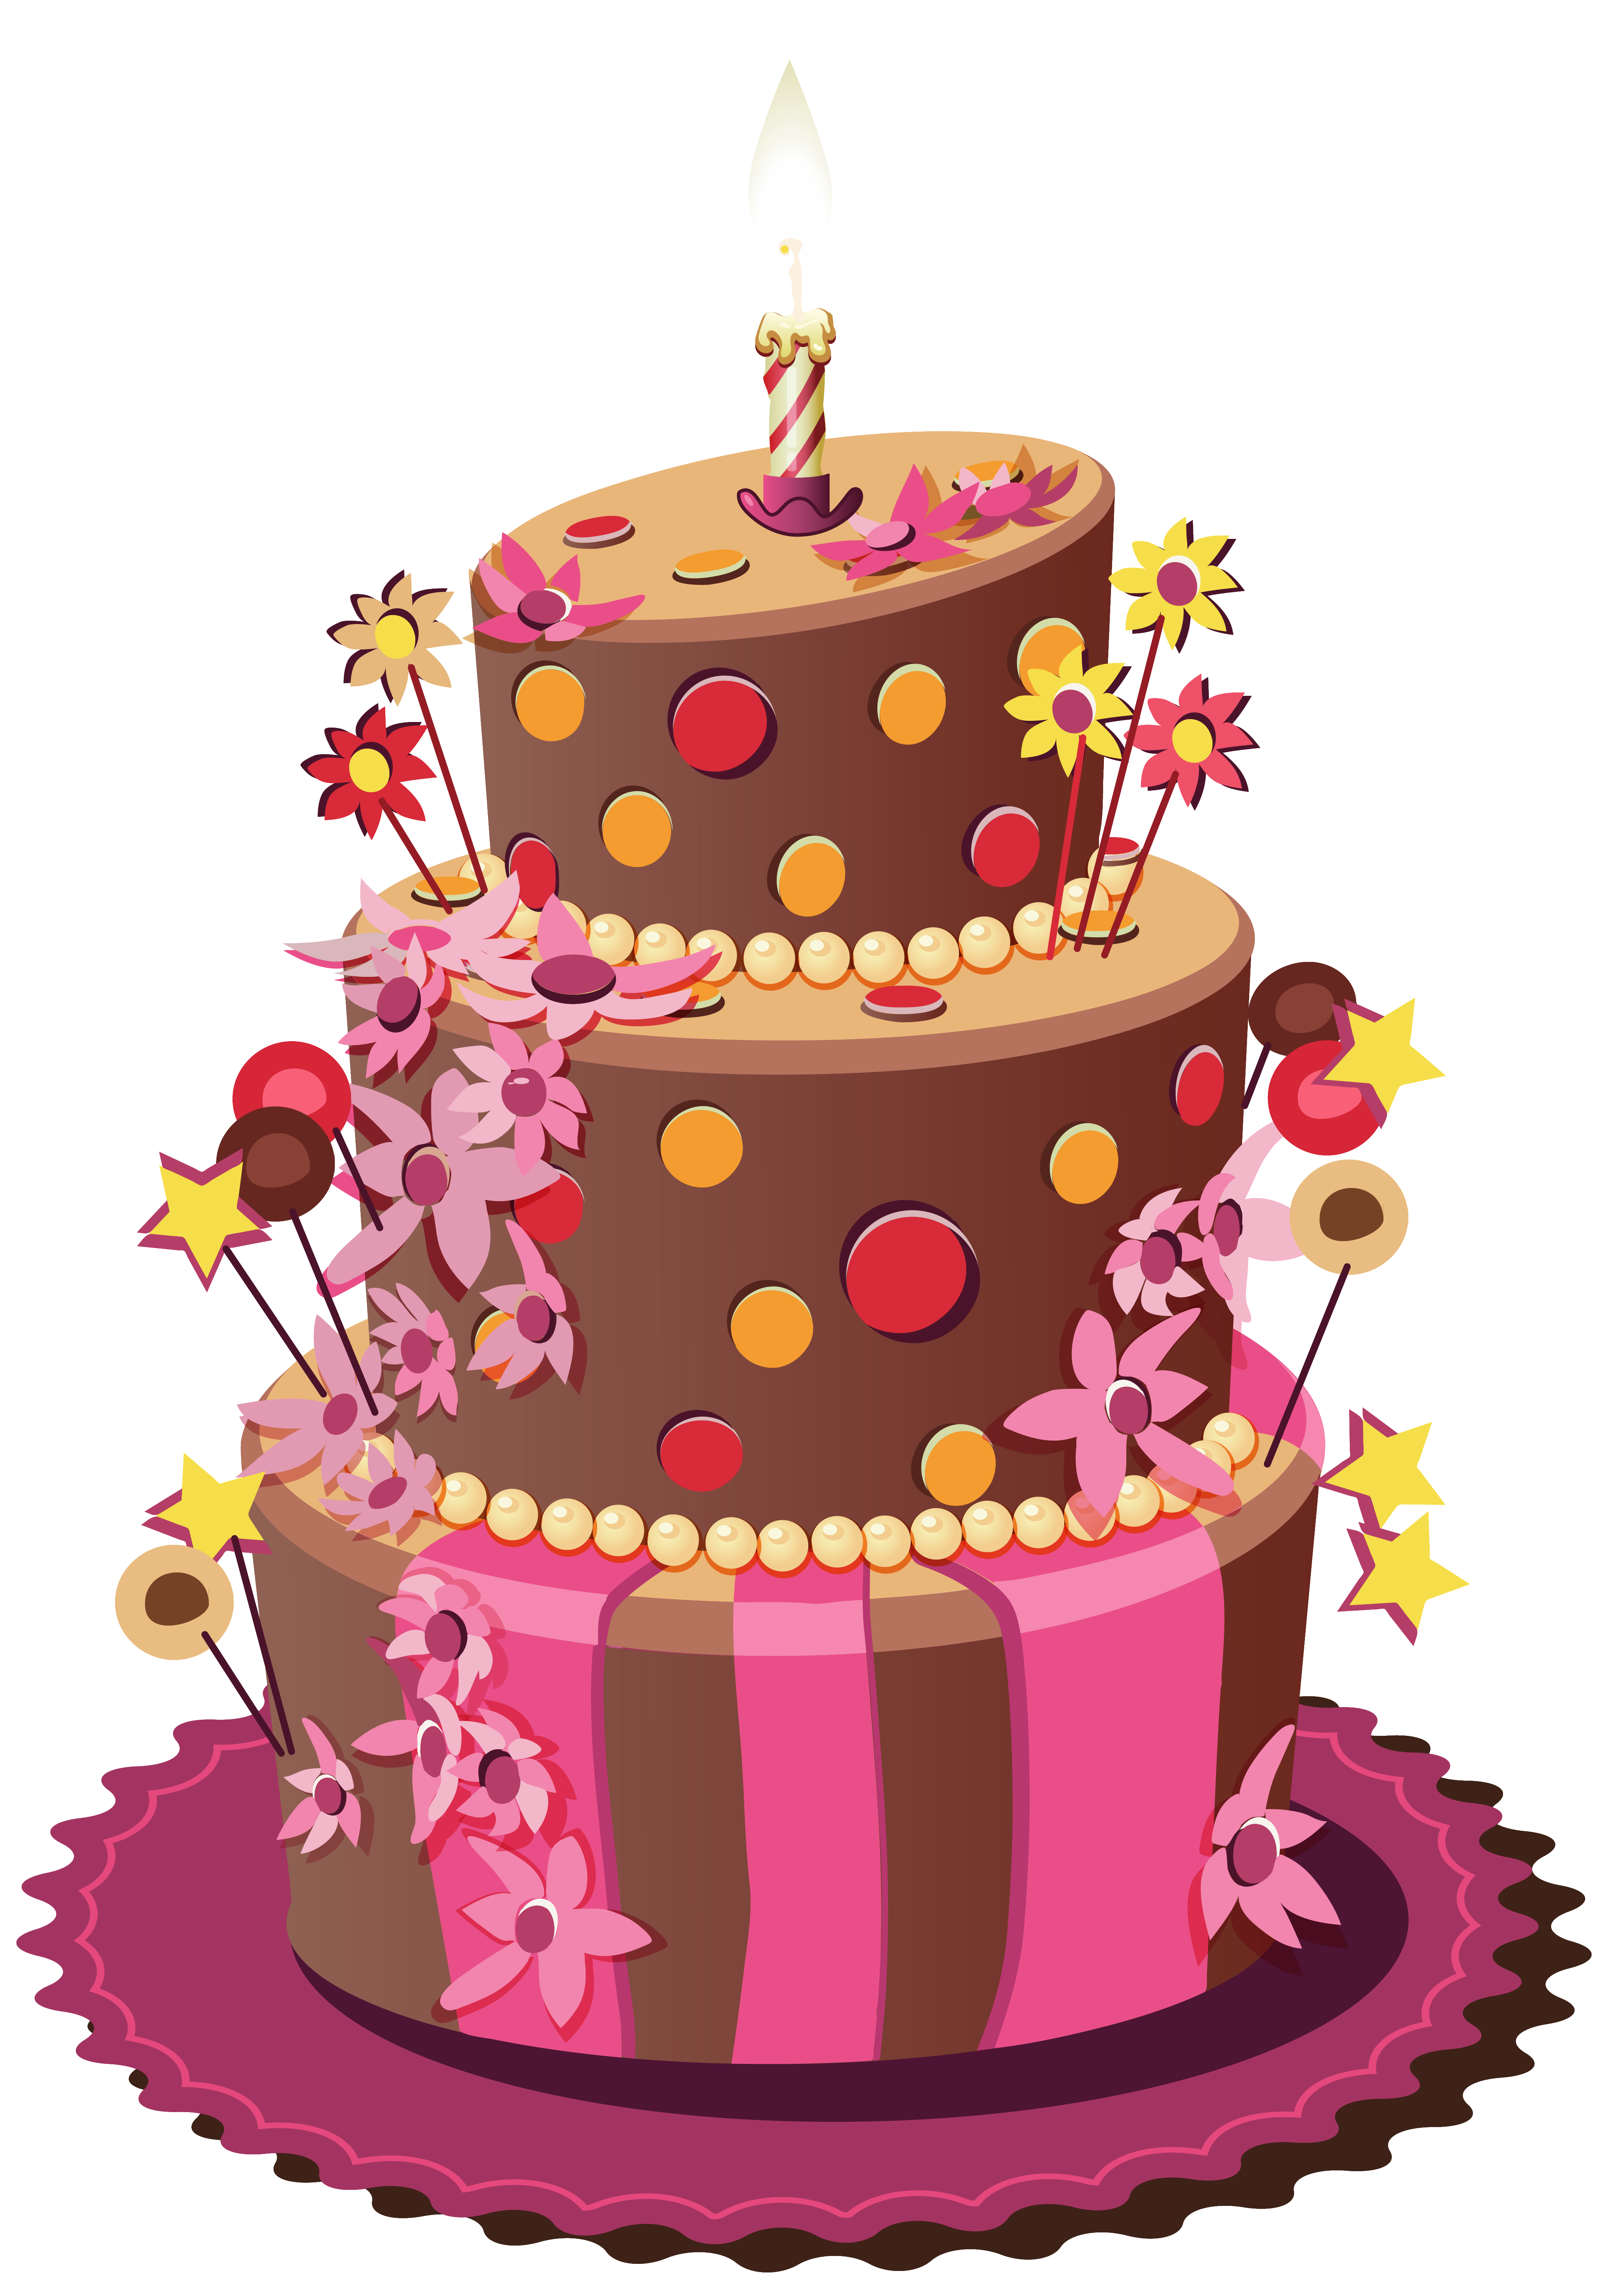 Birthday Cake PNG Clipart Image 71561899